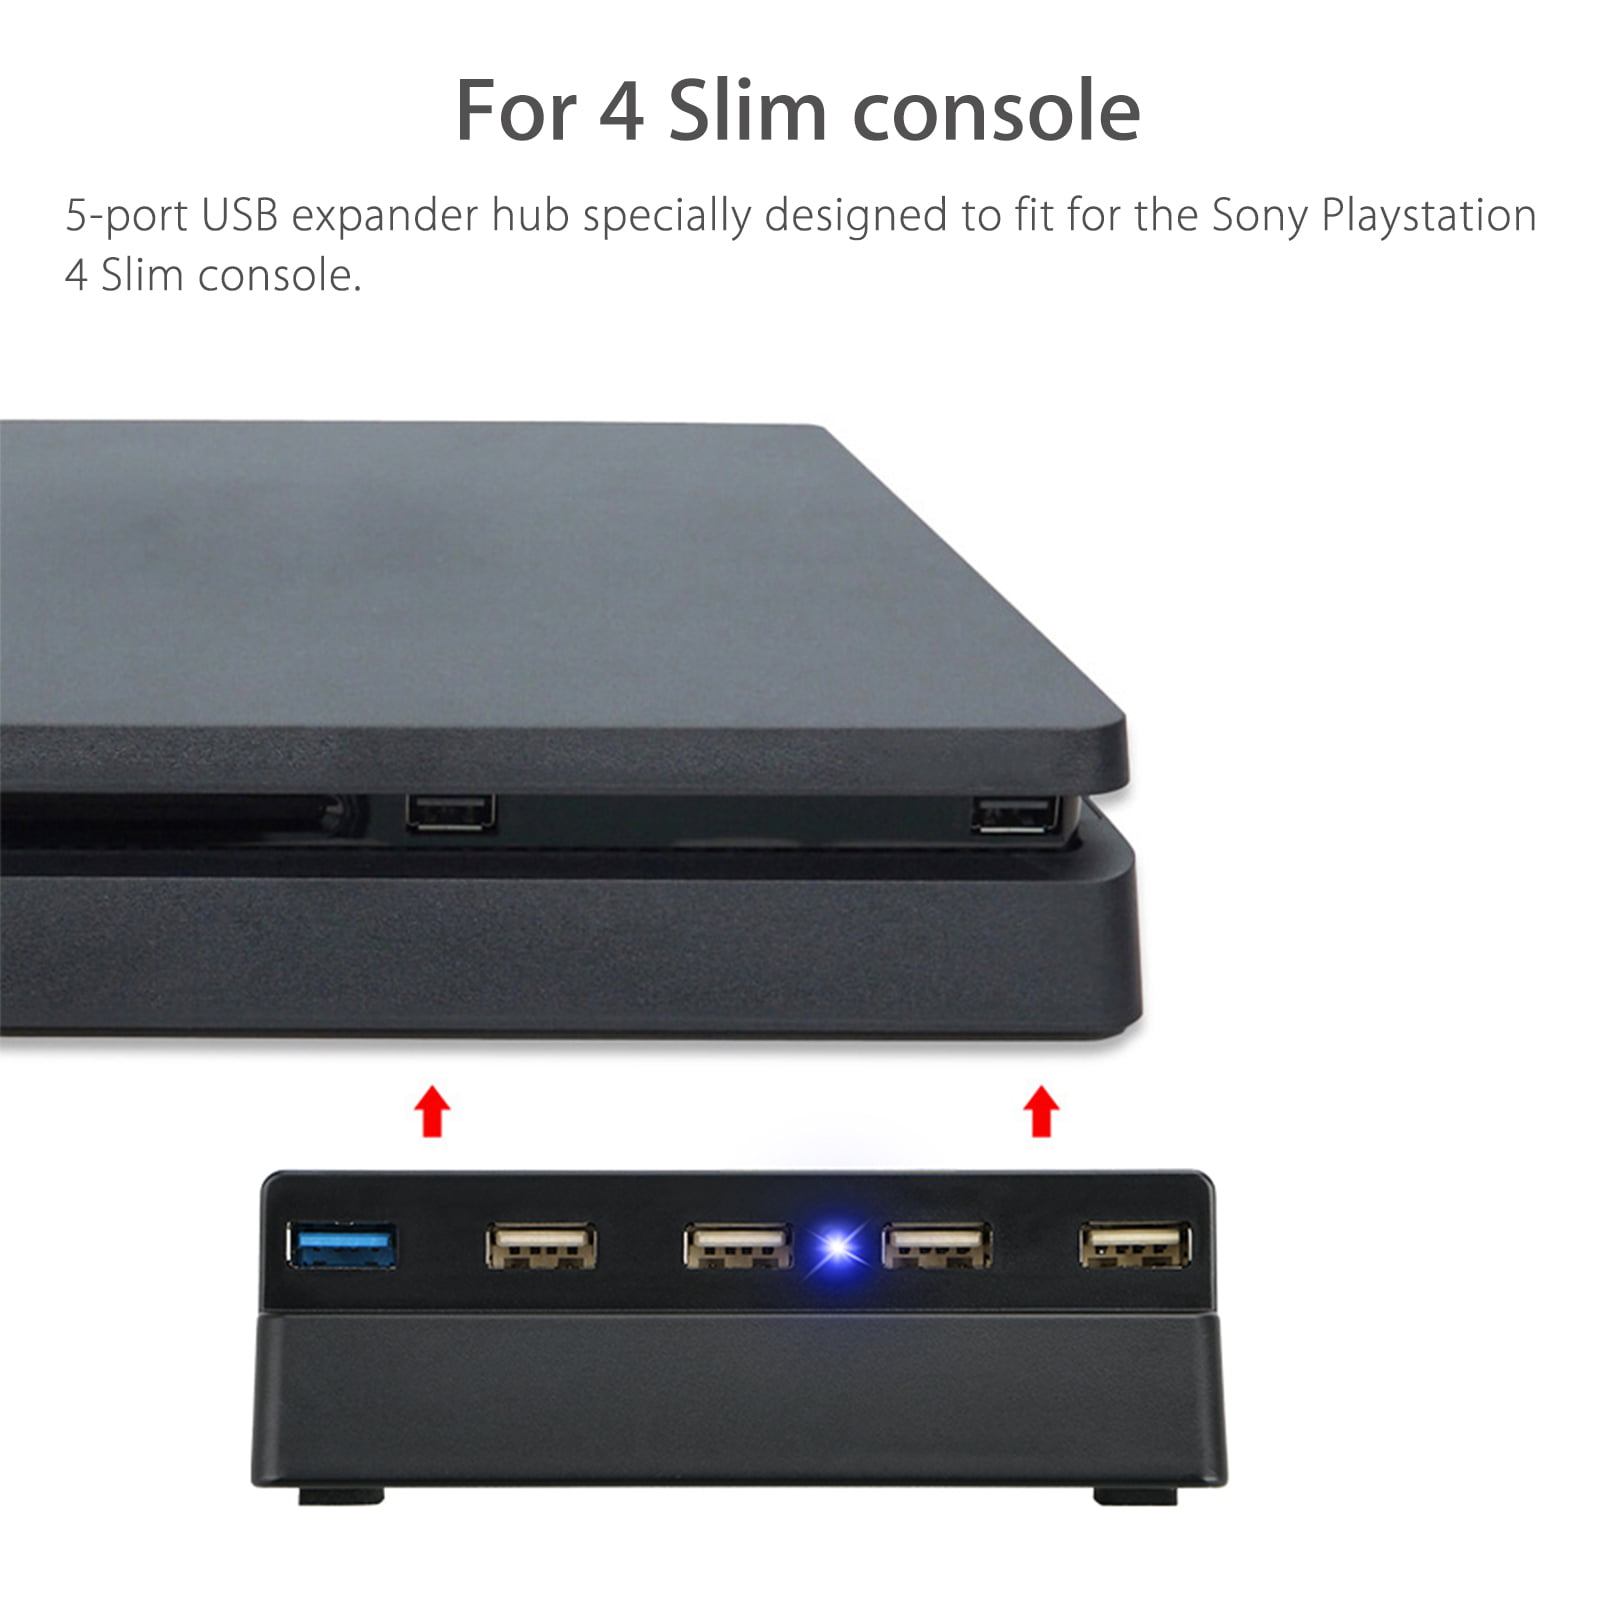 TSV 5 Port USB Hub for PS4, USB 3.0 High-Speed Adapter Accessories  Expansion Hub Connector Splitter Expander Fit for PlayStation 4 PS4 Gaming  Console